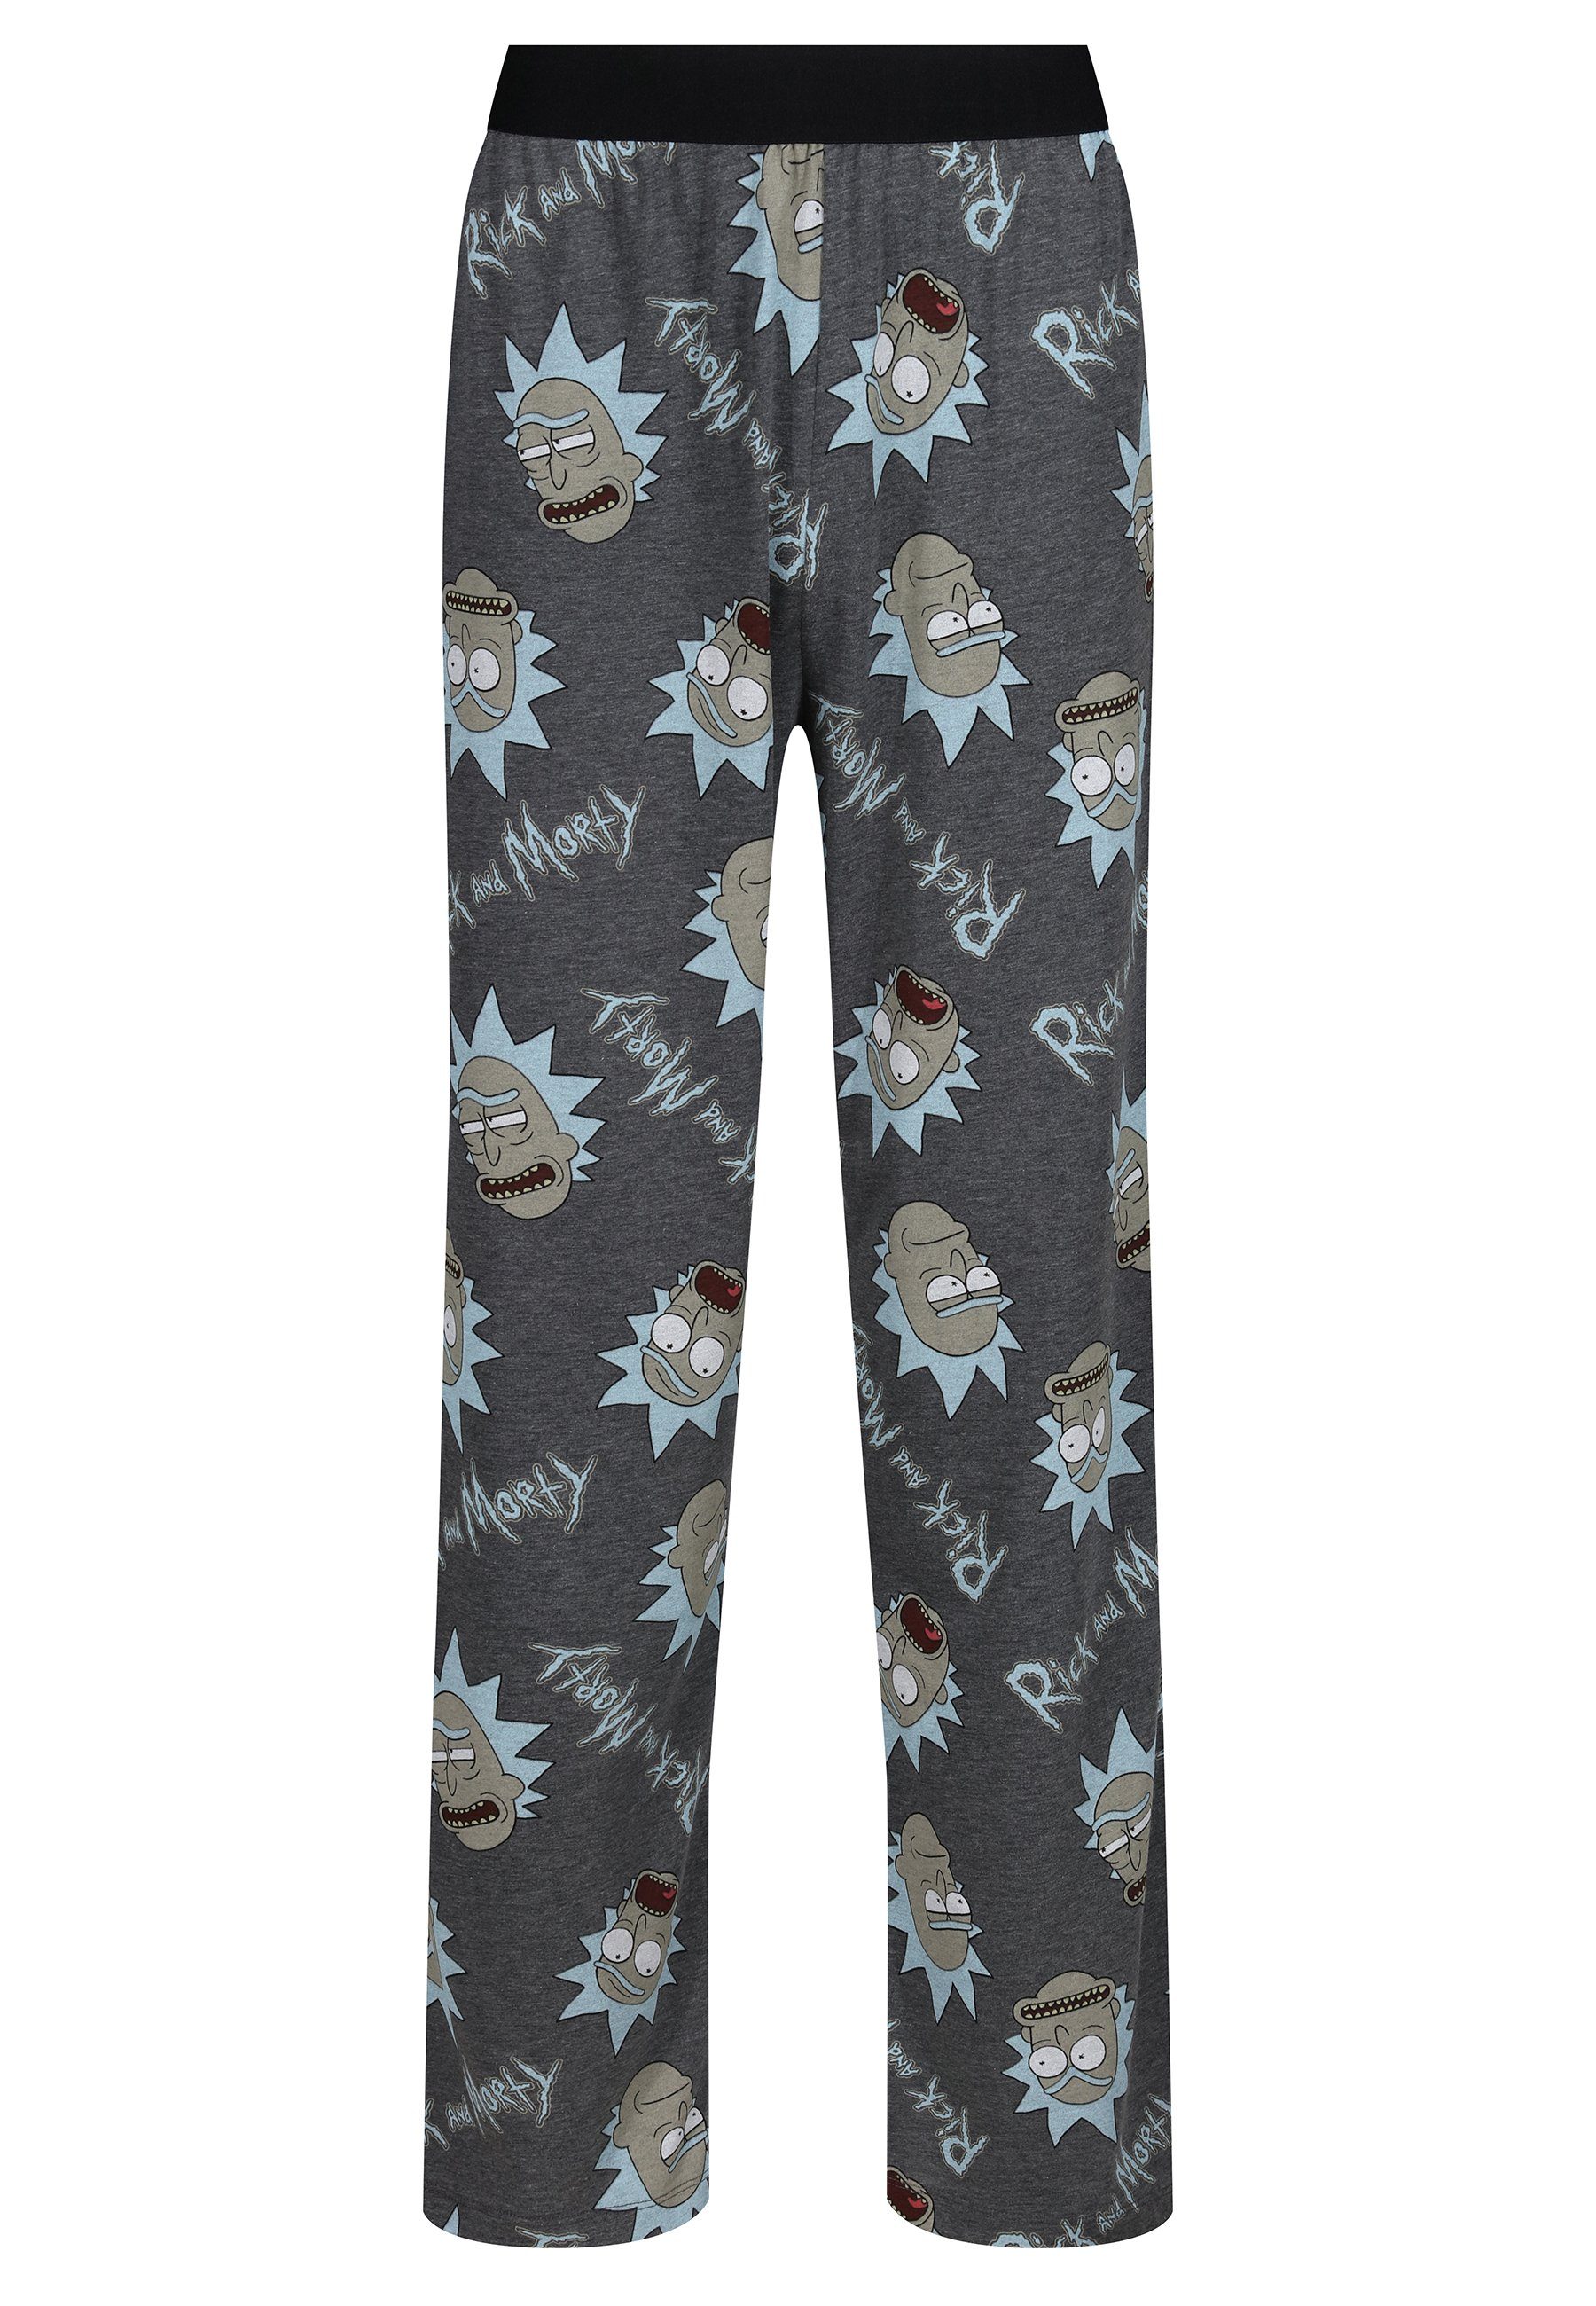 Recovered Loungepants Lounge Pant - Rick and Morty Faces and Logo all over print - grey